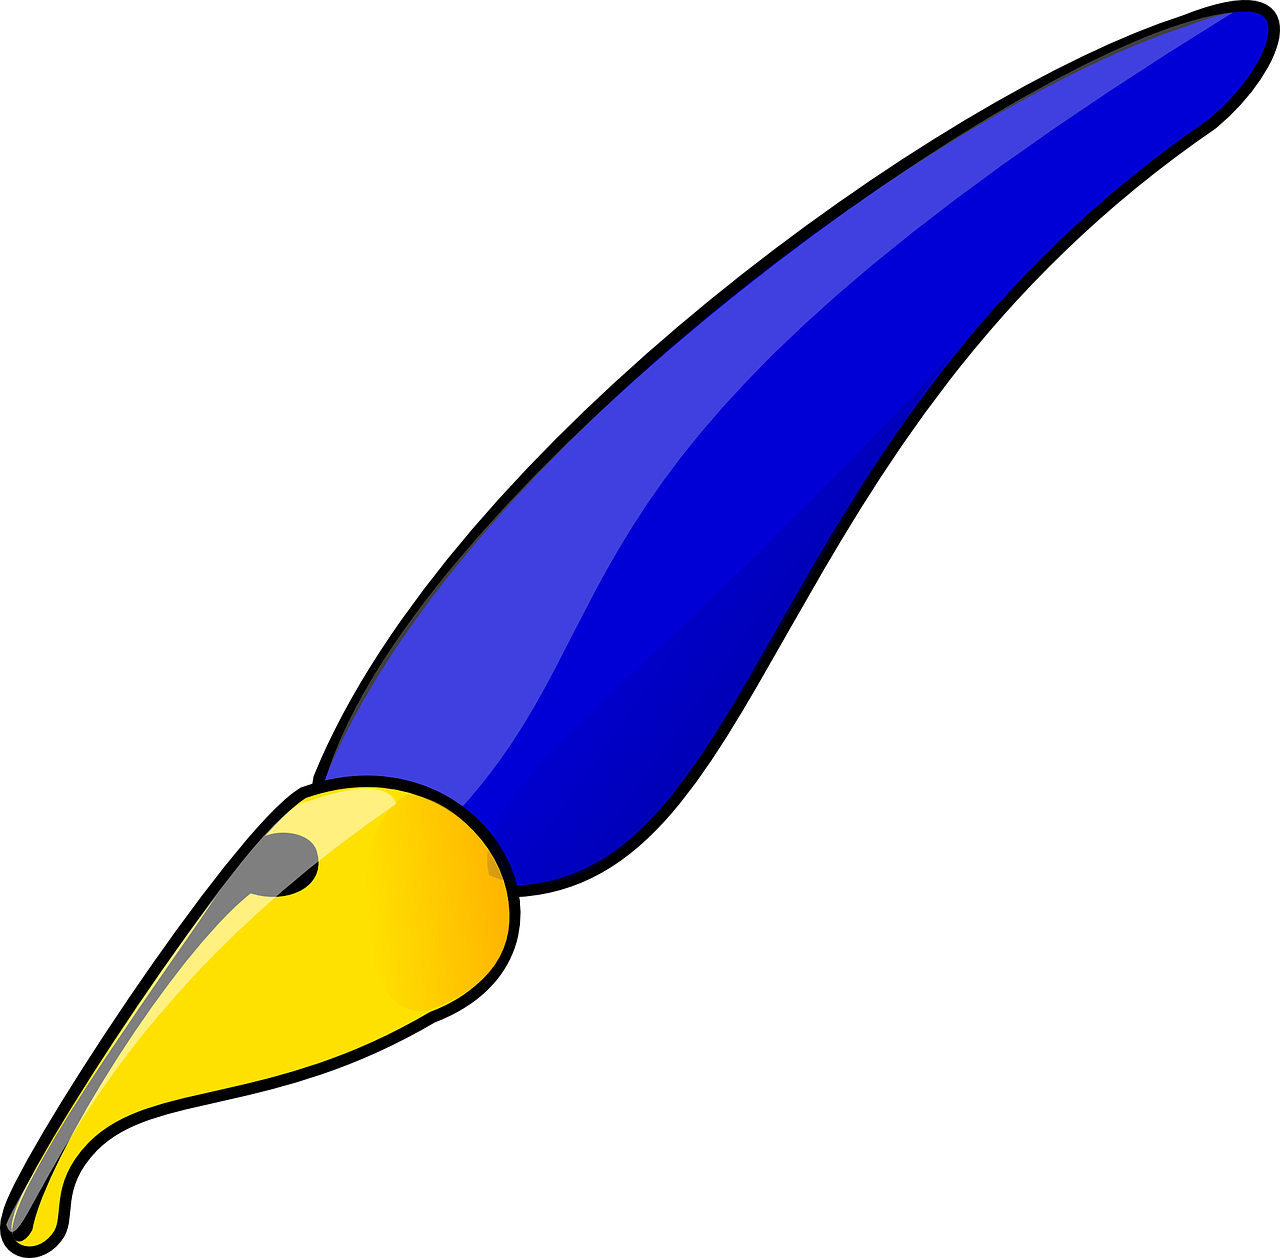 a blue pen with a yellow tip, inspired by Edward Lear, academic art, !!! very coherent!!! vector art, rounded beak, very sharp and detailed image, sleek flowing shapes